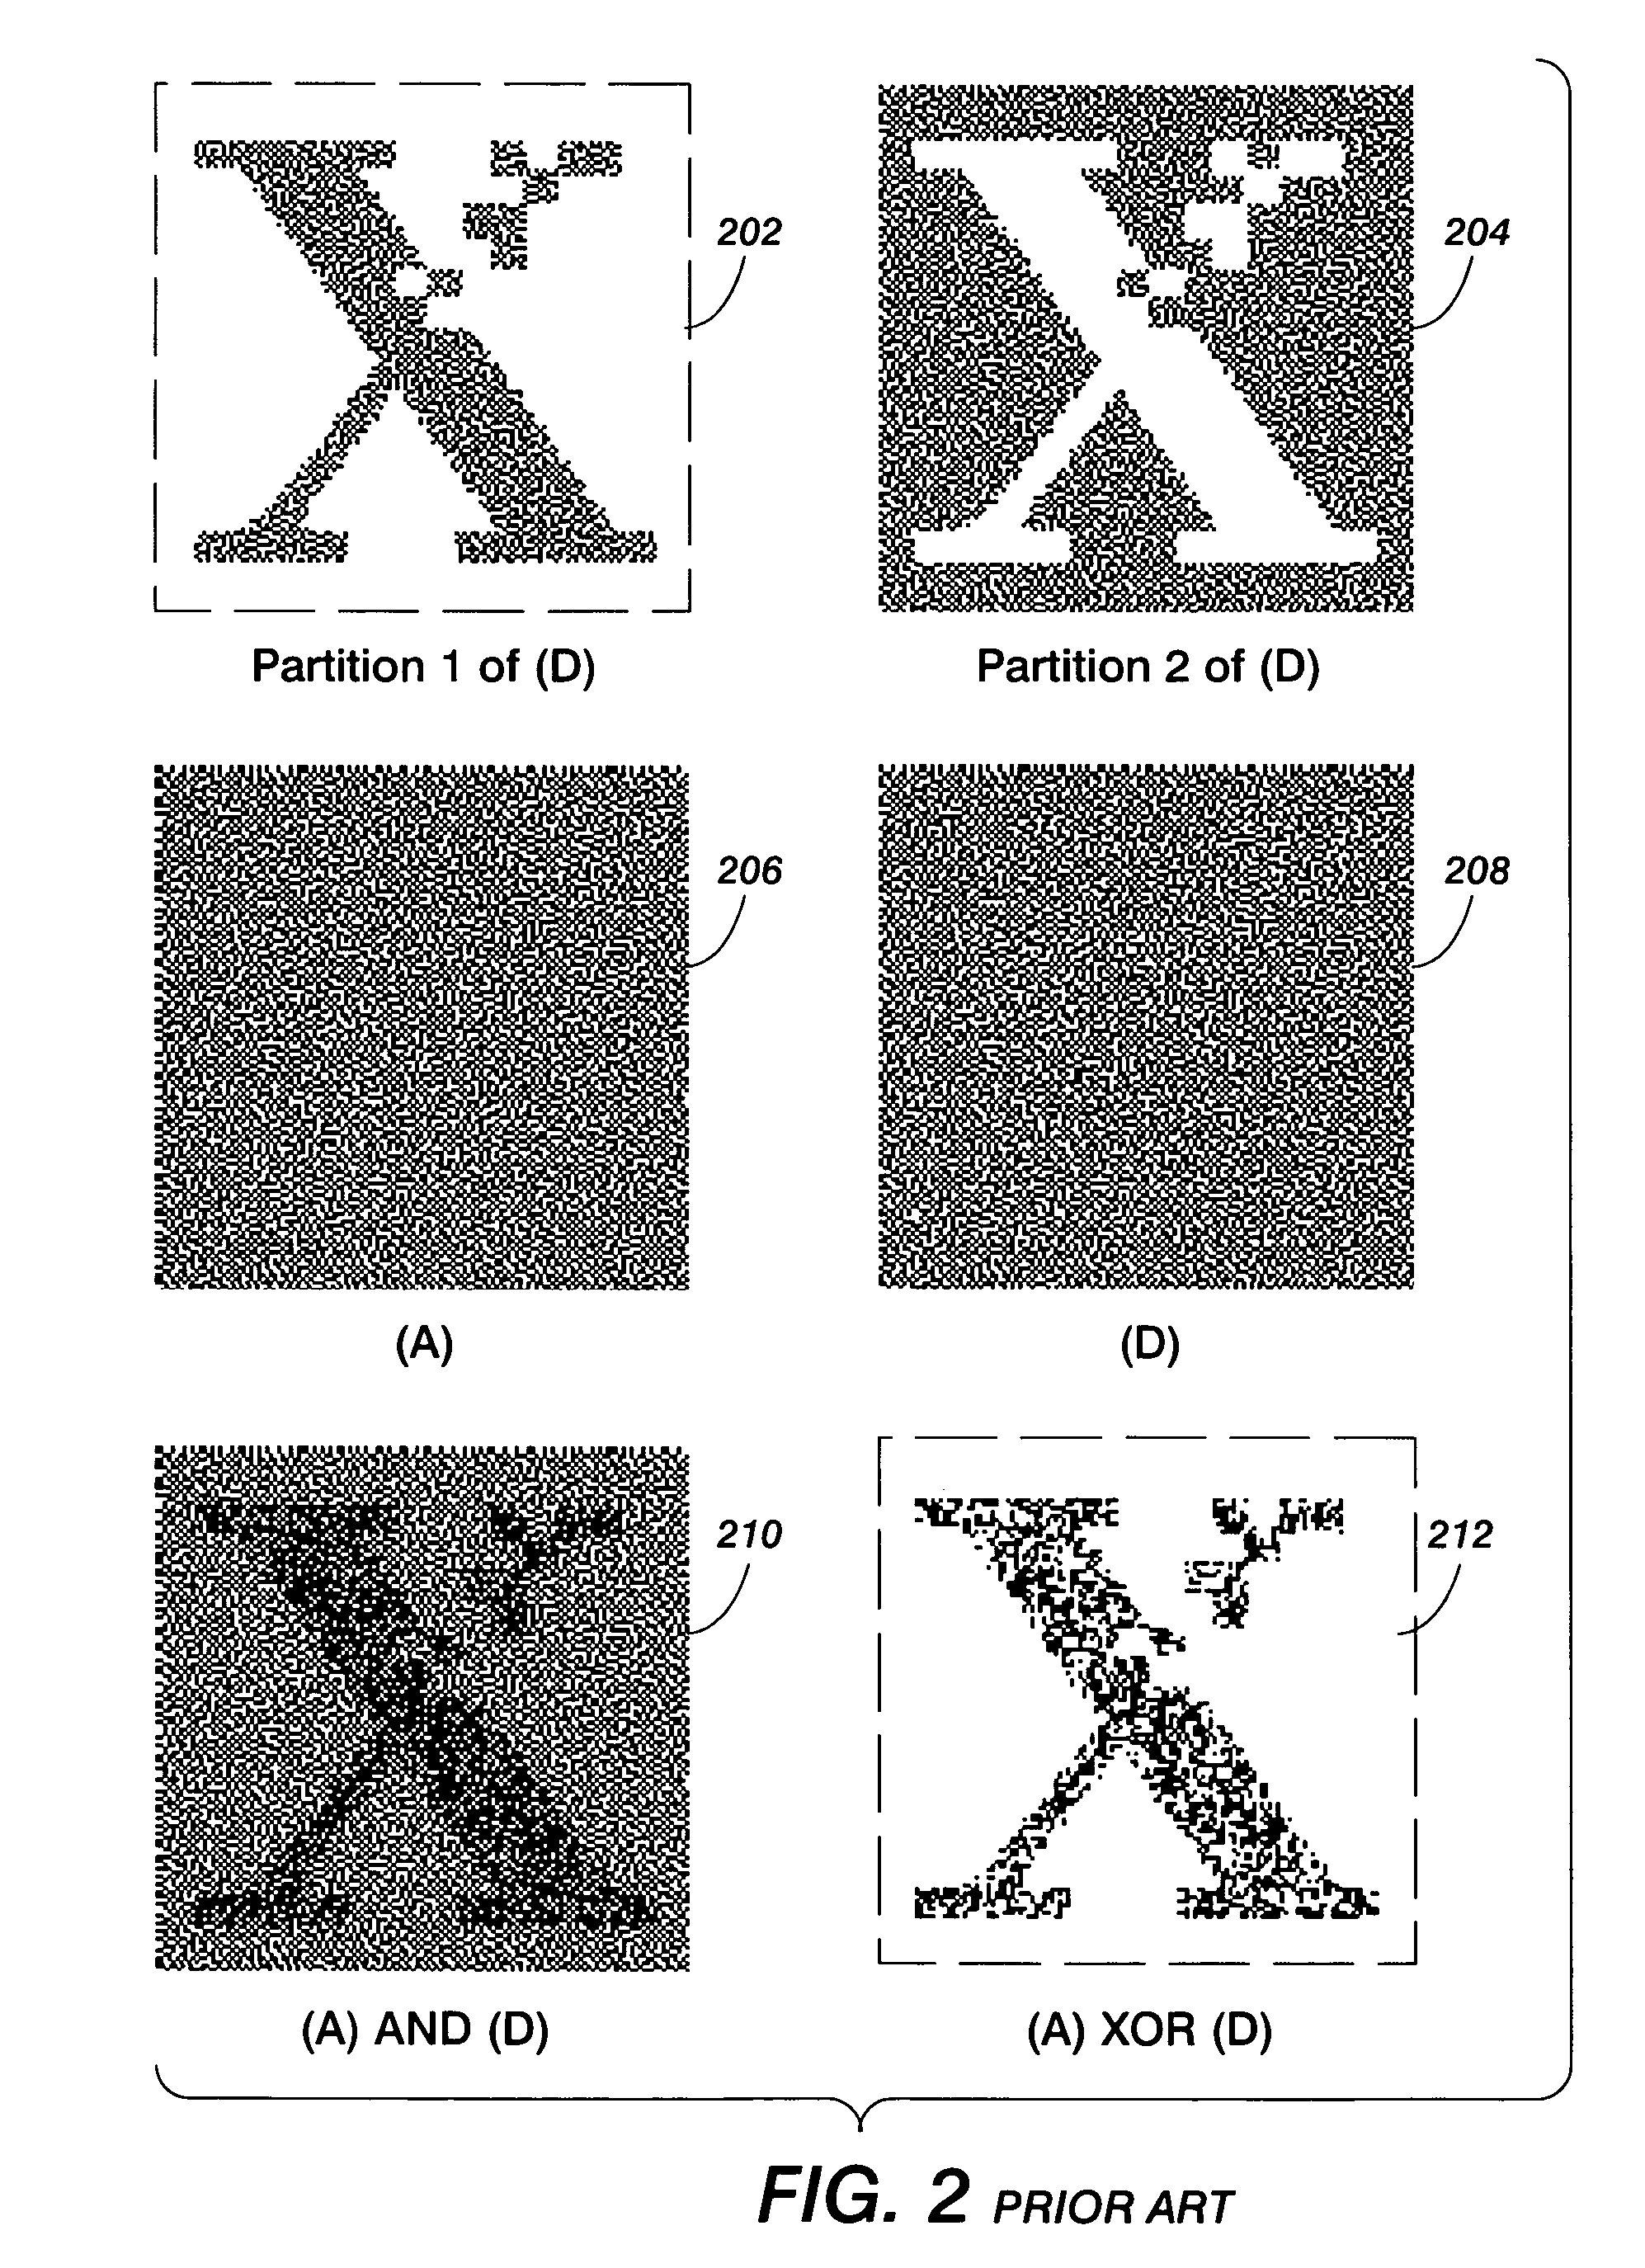 Conjugate cluster screens for embedding digital watermarks into printed halftone documents